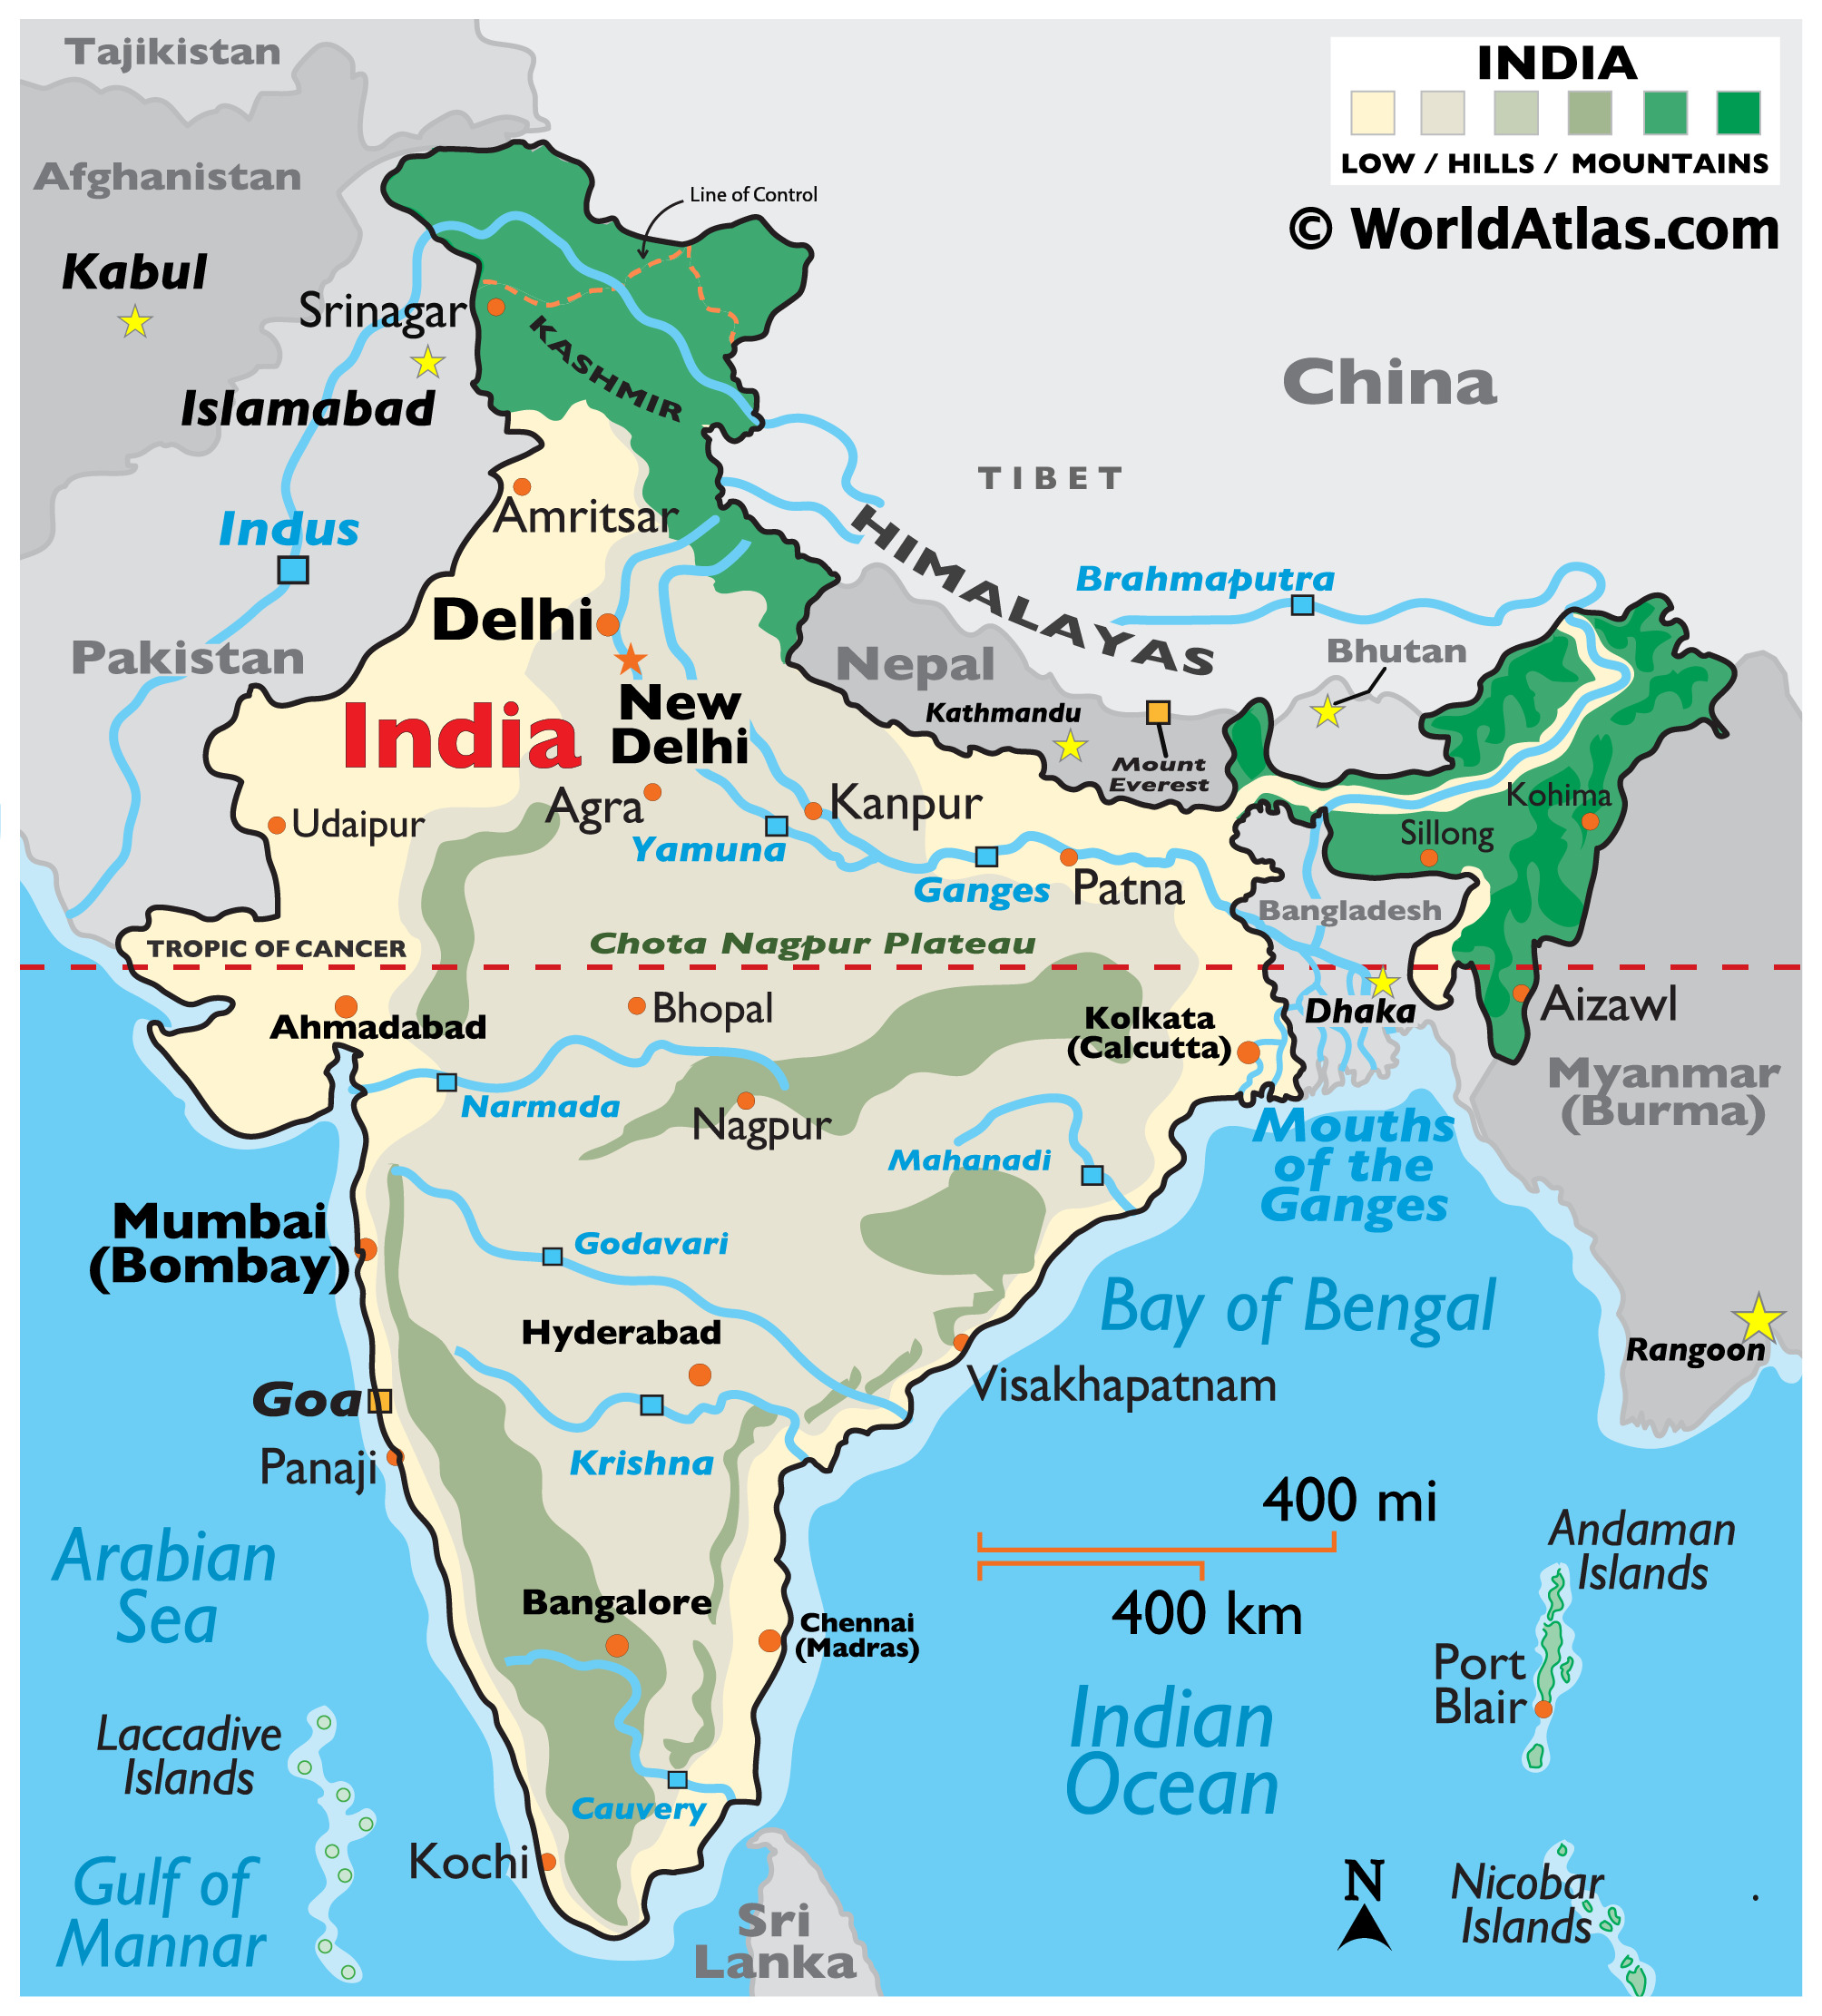 Geography of India - World Atlas